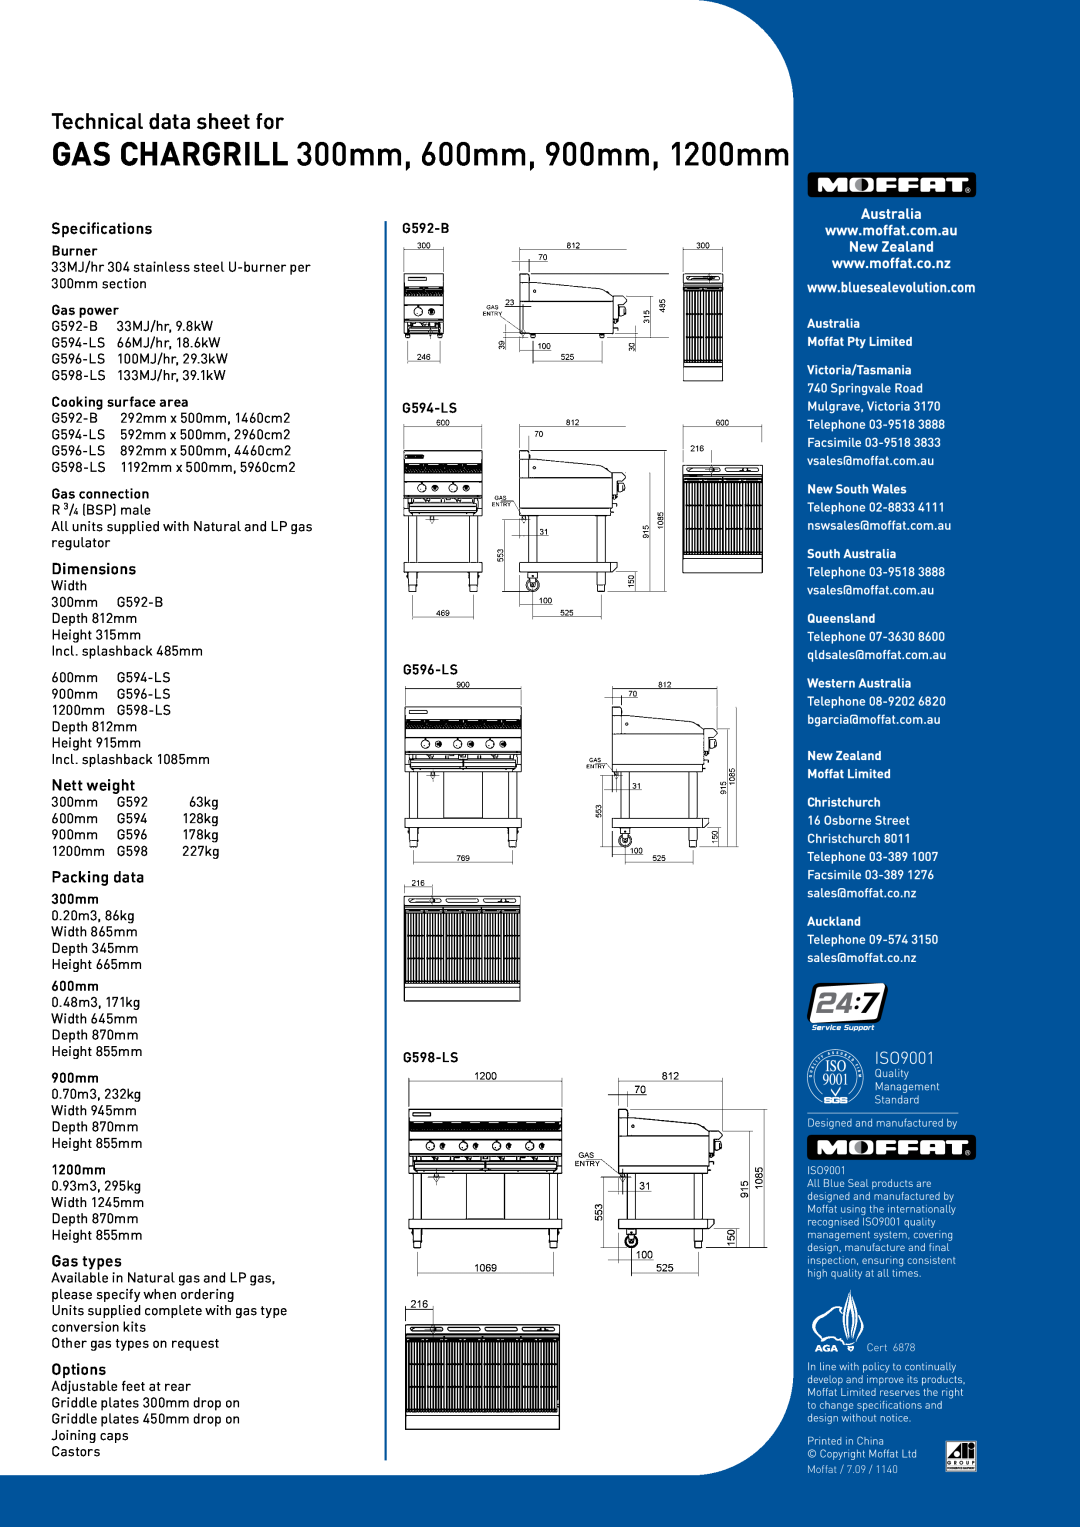 Moffat G596-LS, G592-B Specifications, Dimensions, Nett weight, Packing data, Gas types, Options, Technical data sheet for 